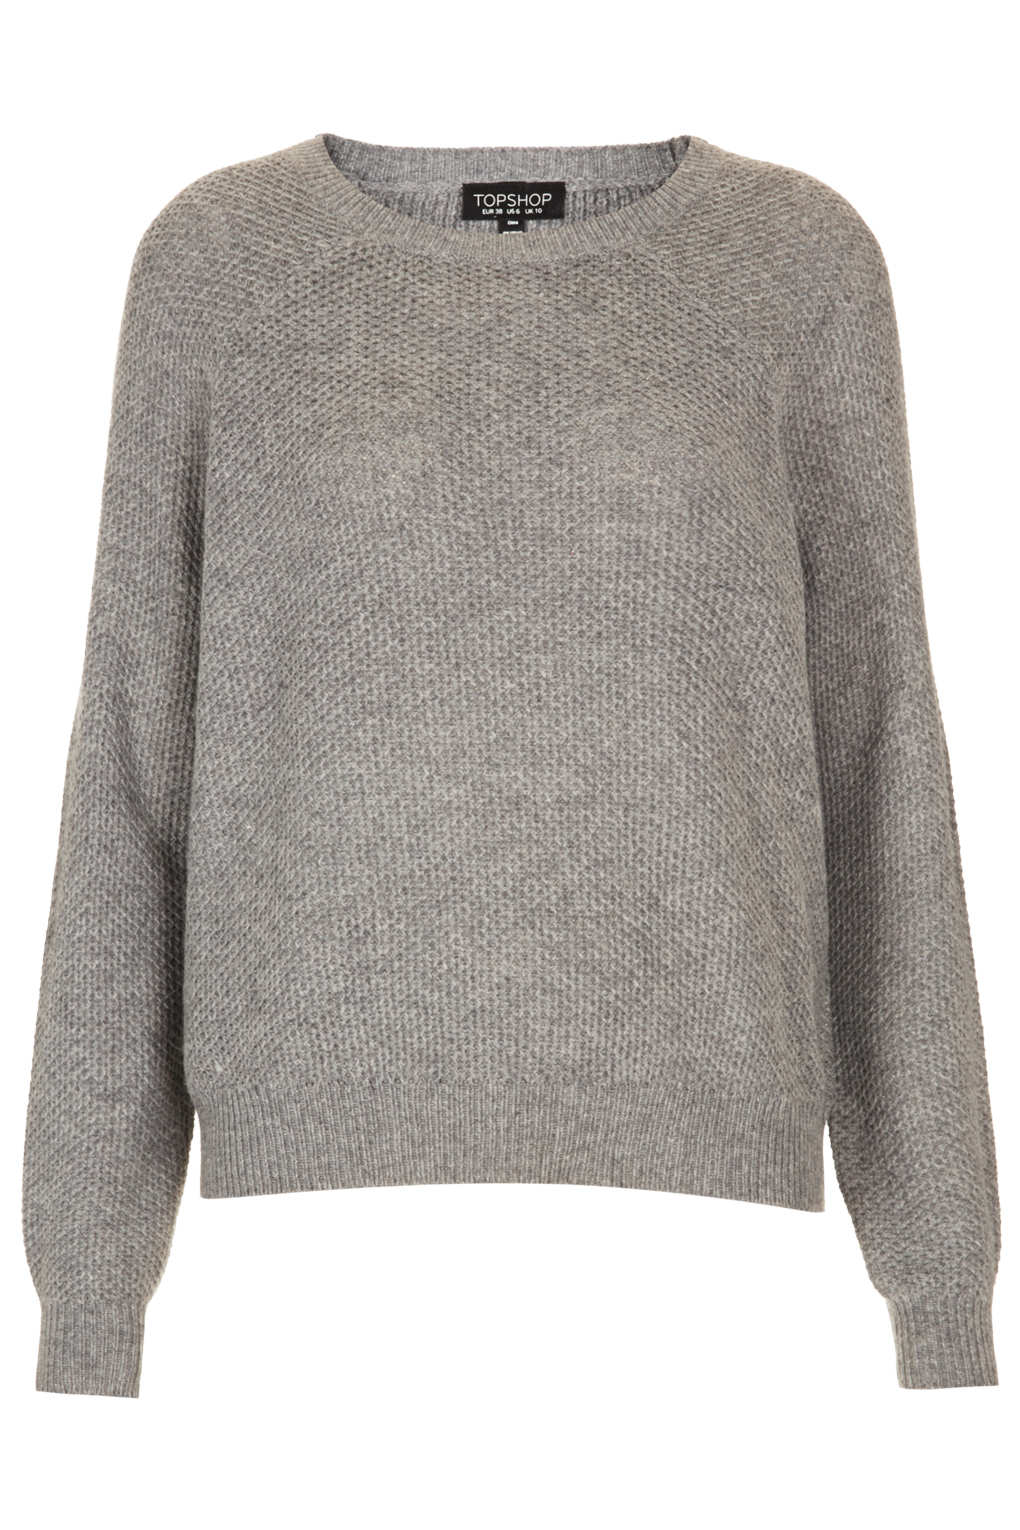 Lyst - Topshop Knitted Elbow Patch Jumper in Gray